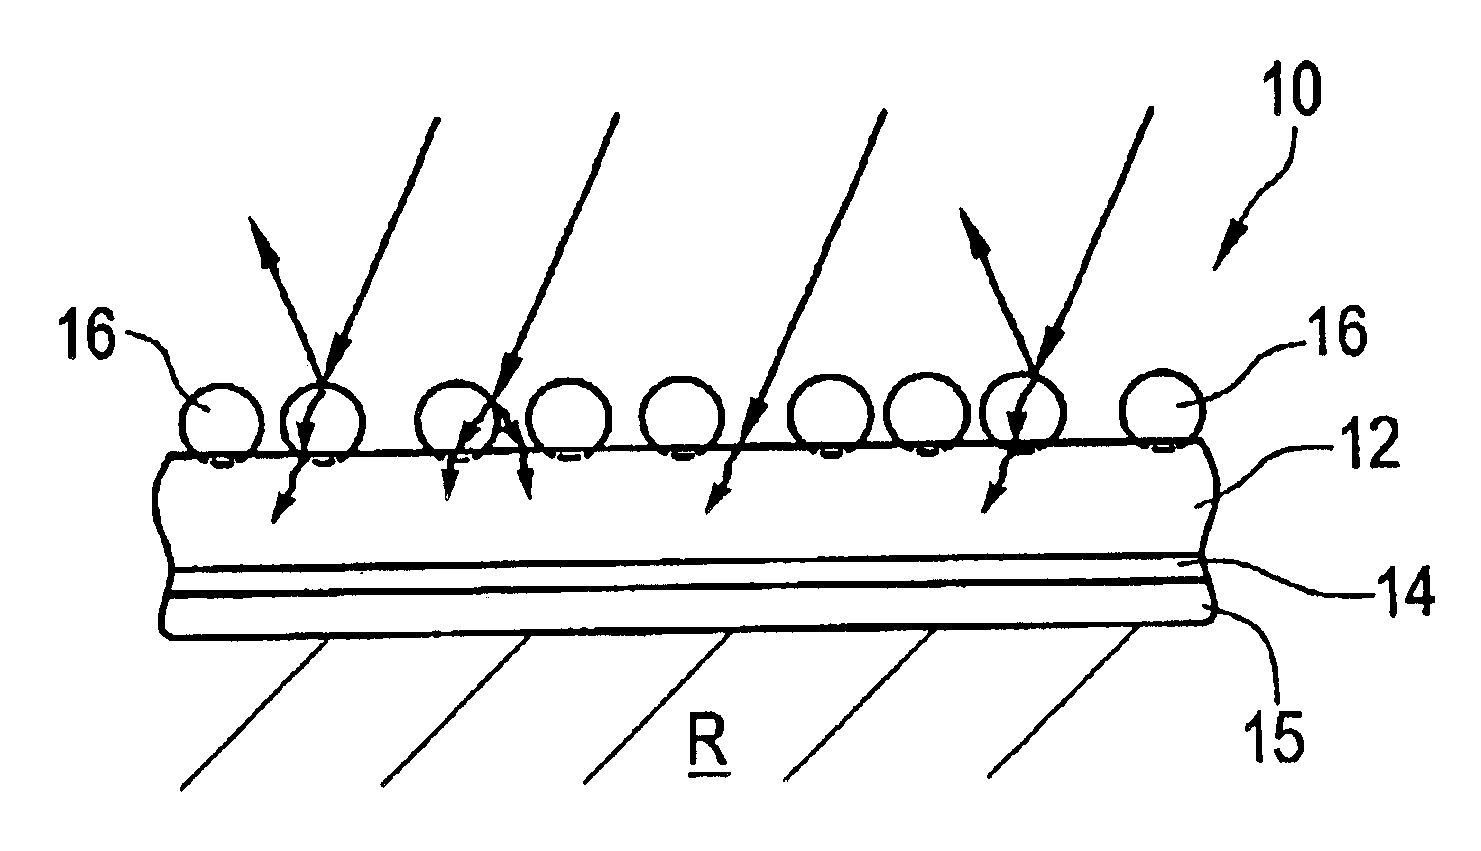 Method of forming an improved roofing material